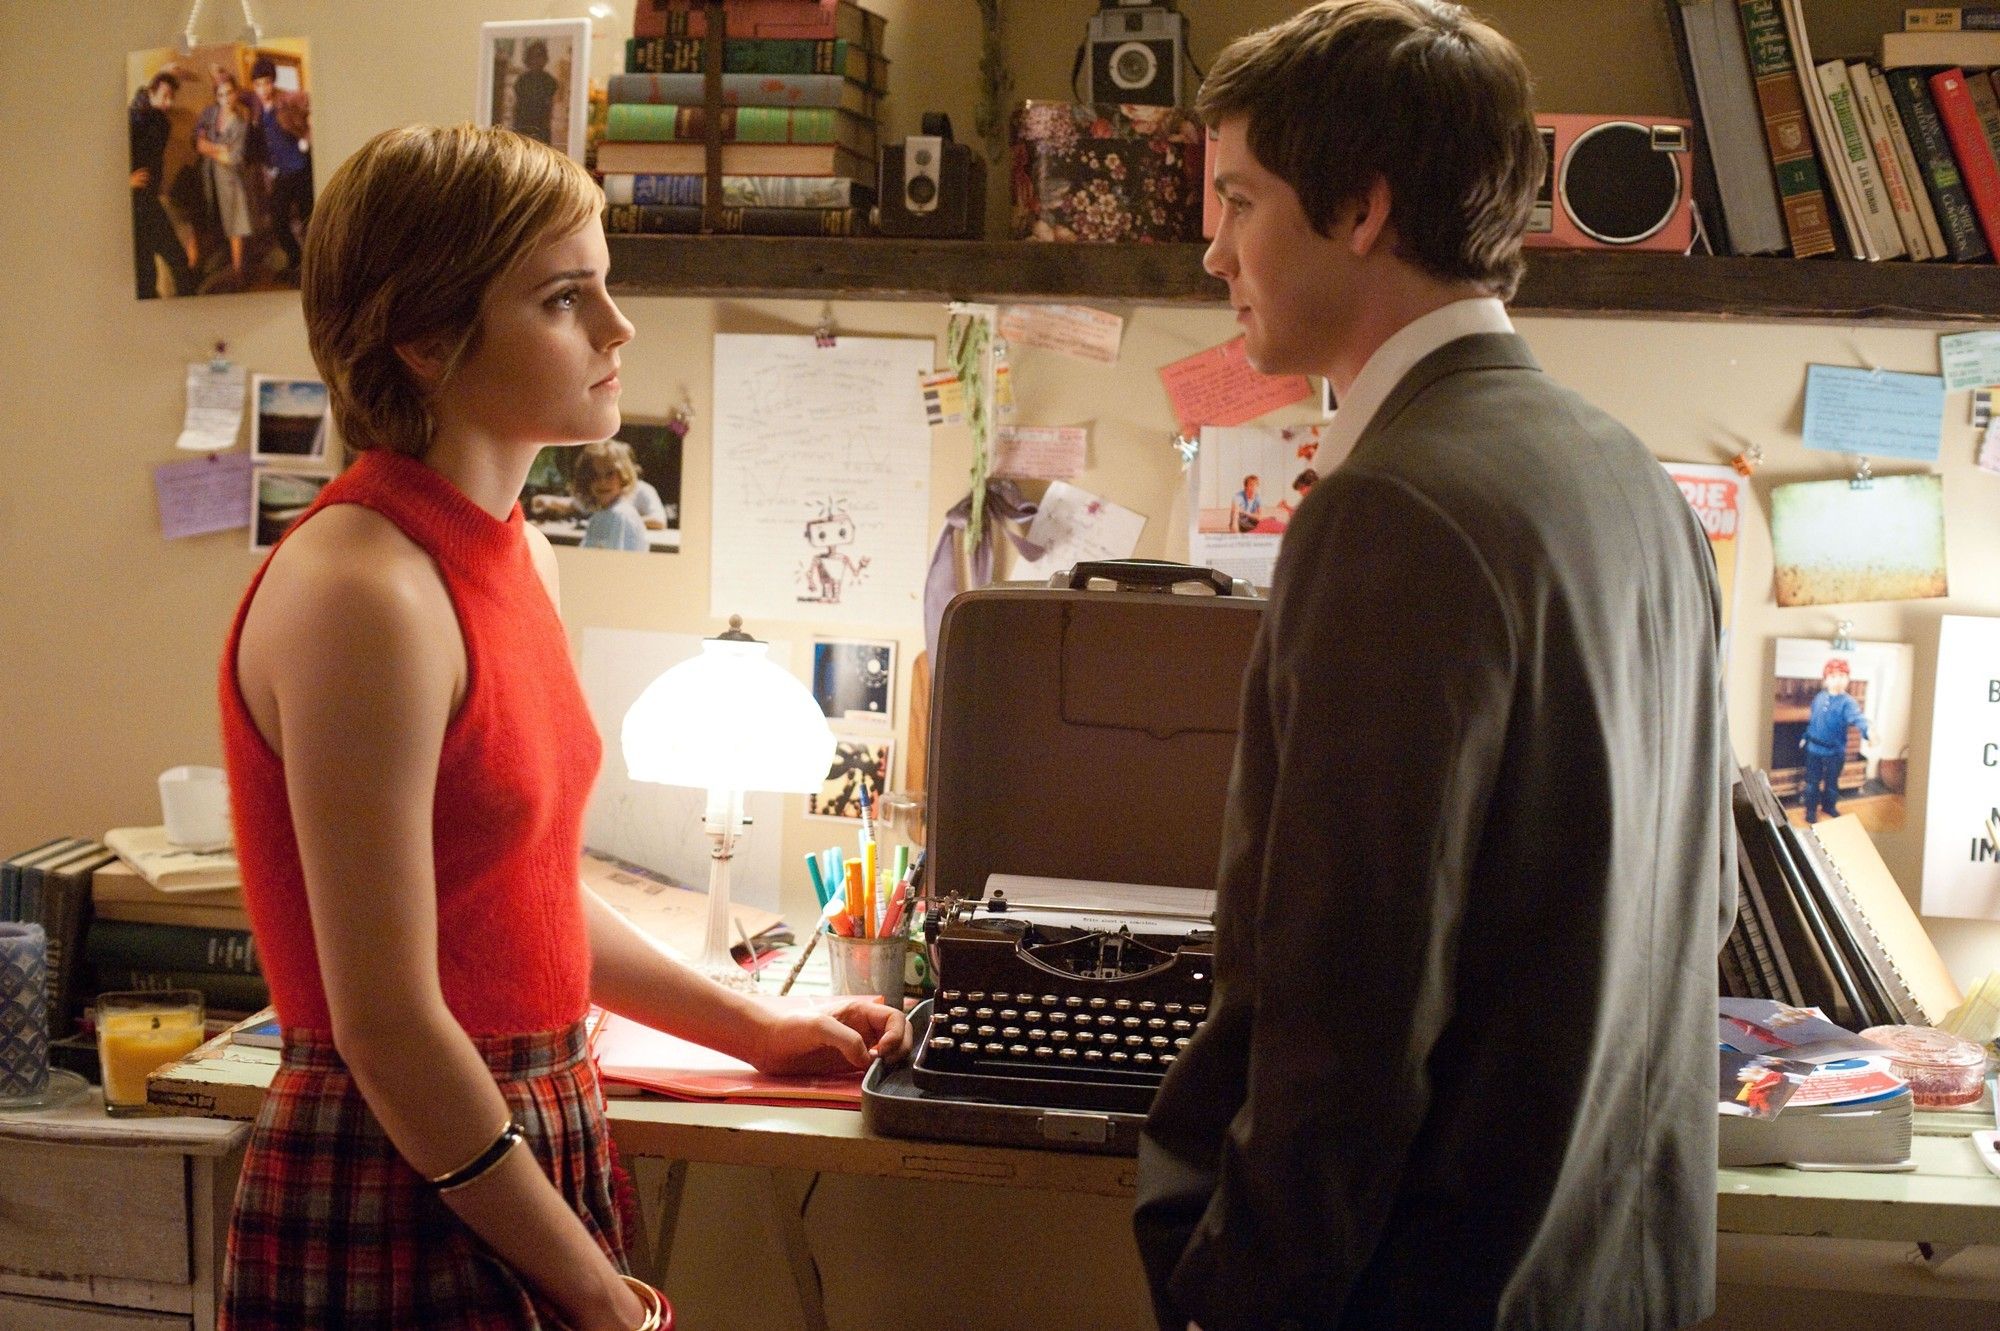 Emma Watson in The Perks of Being a Wallflower